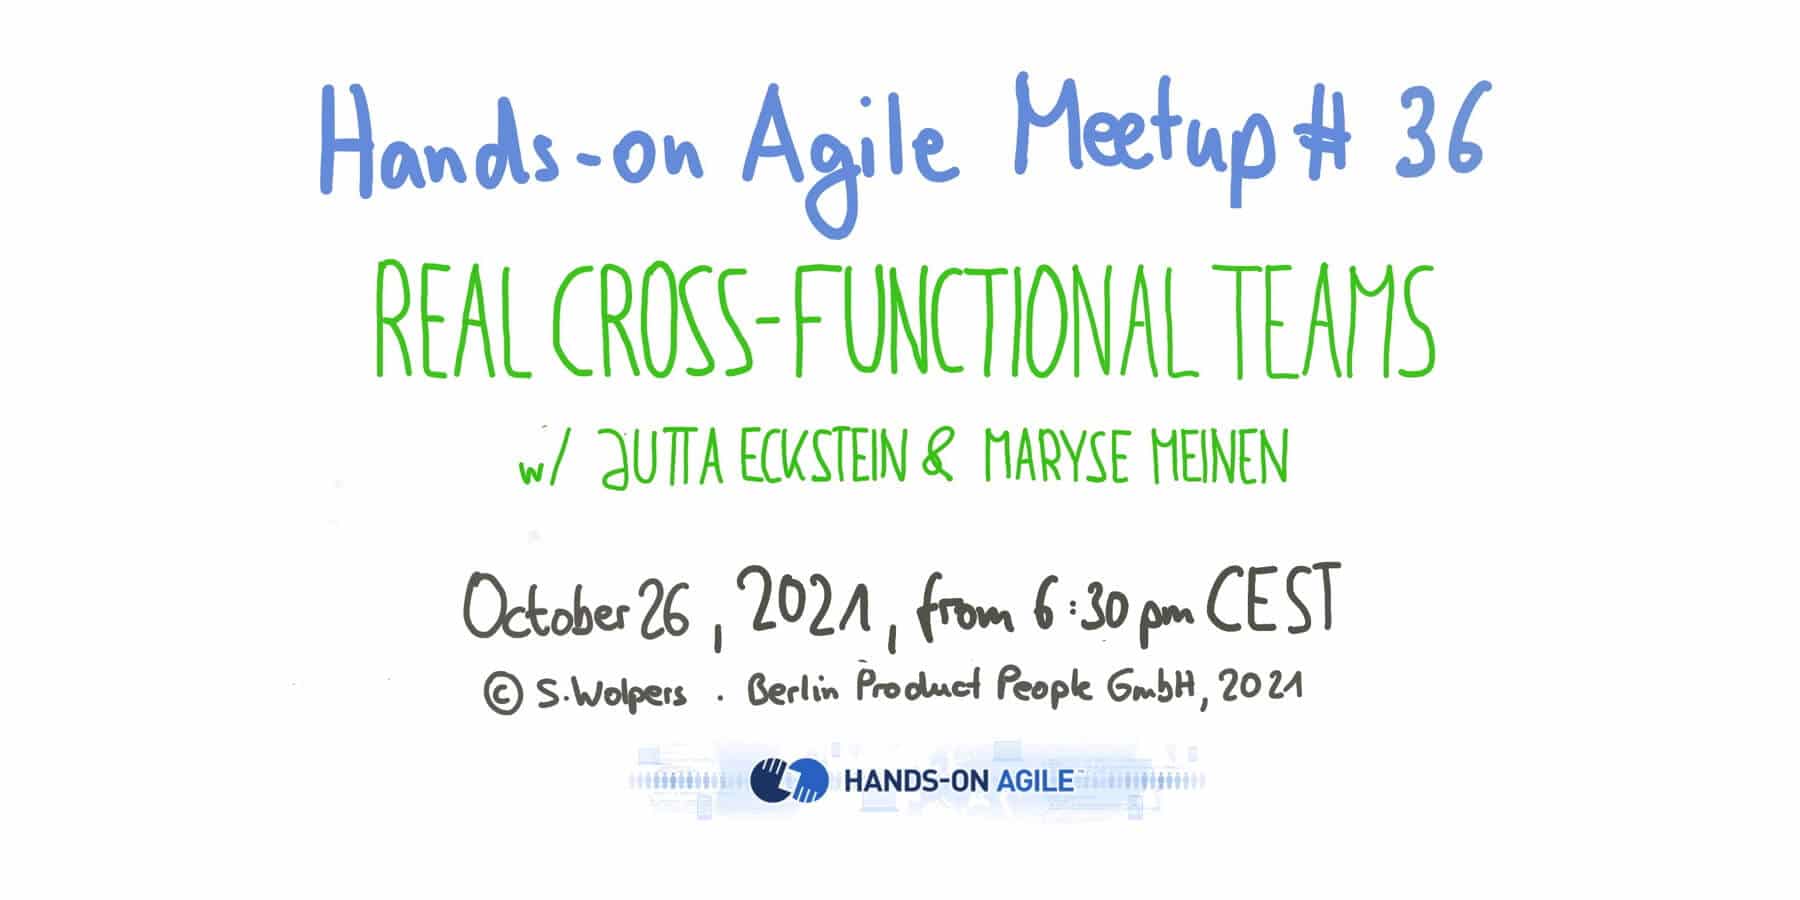 October 26, 2021, at 6:30 pm: Hands-on Agile #36: Real Cross-functional Teams w/ Jutta Eckstein & Maryse Meinen — Berlin Product People GmbH.